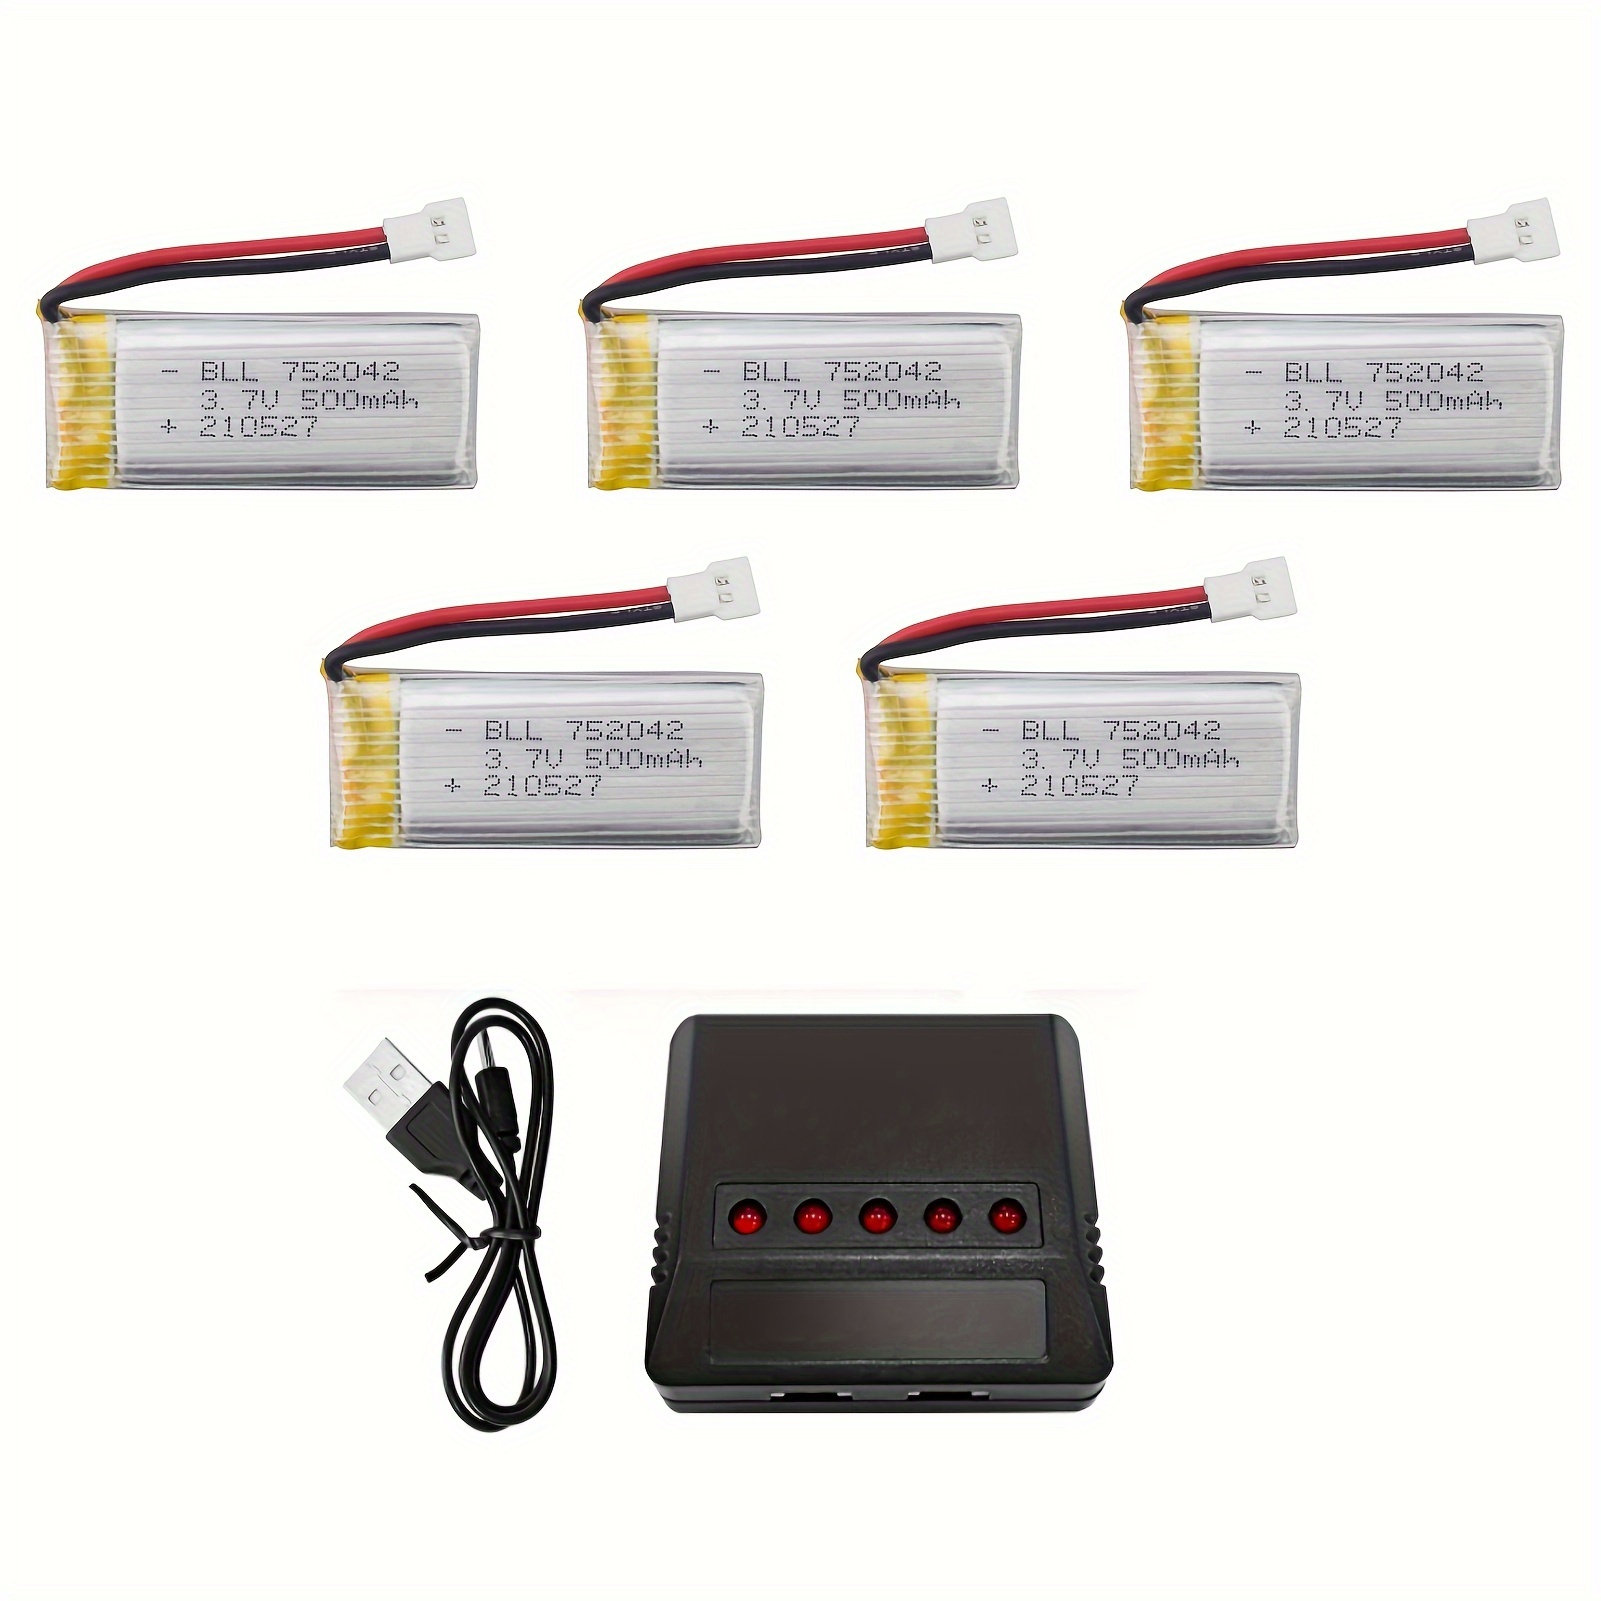 CR123A Lithium Ion Battery for ii.ri-C Controller